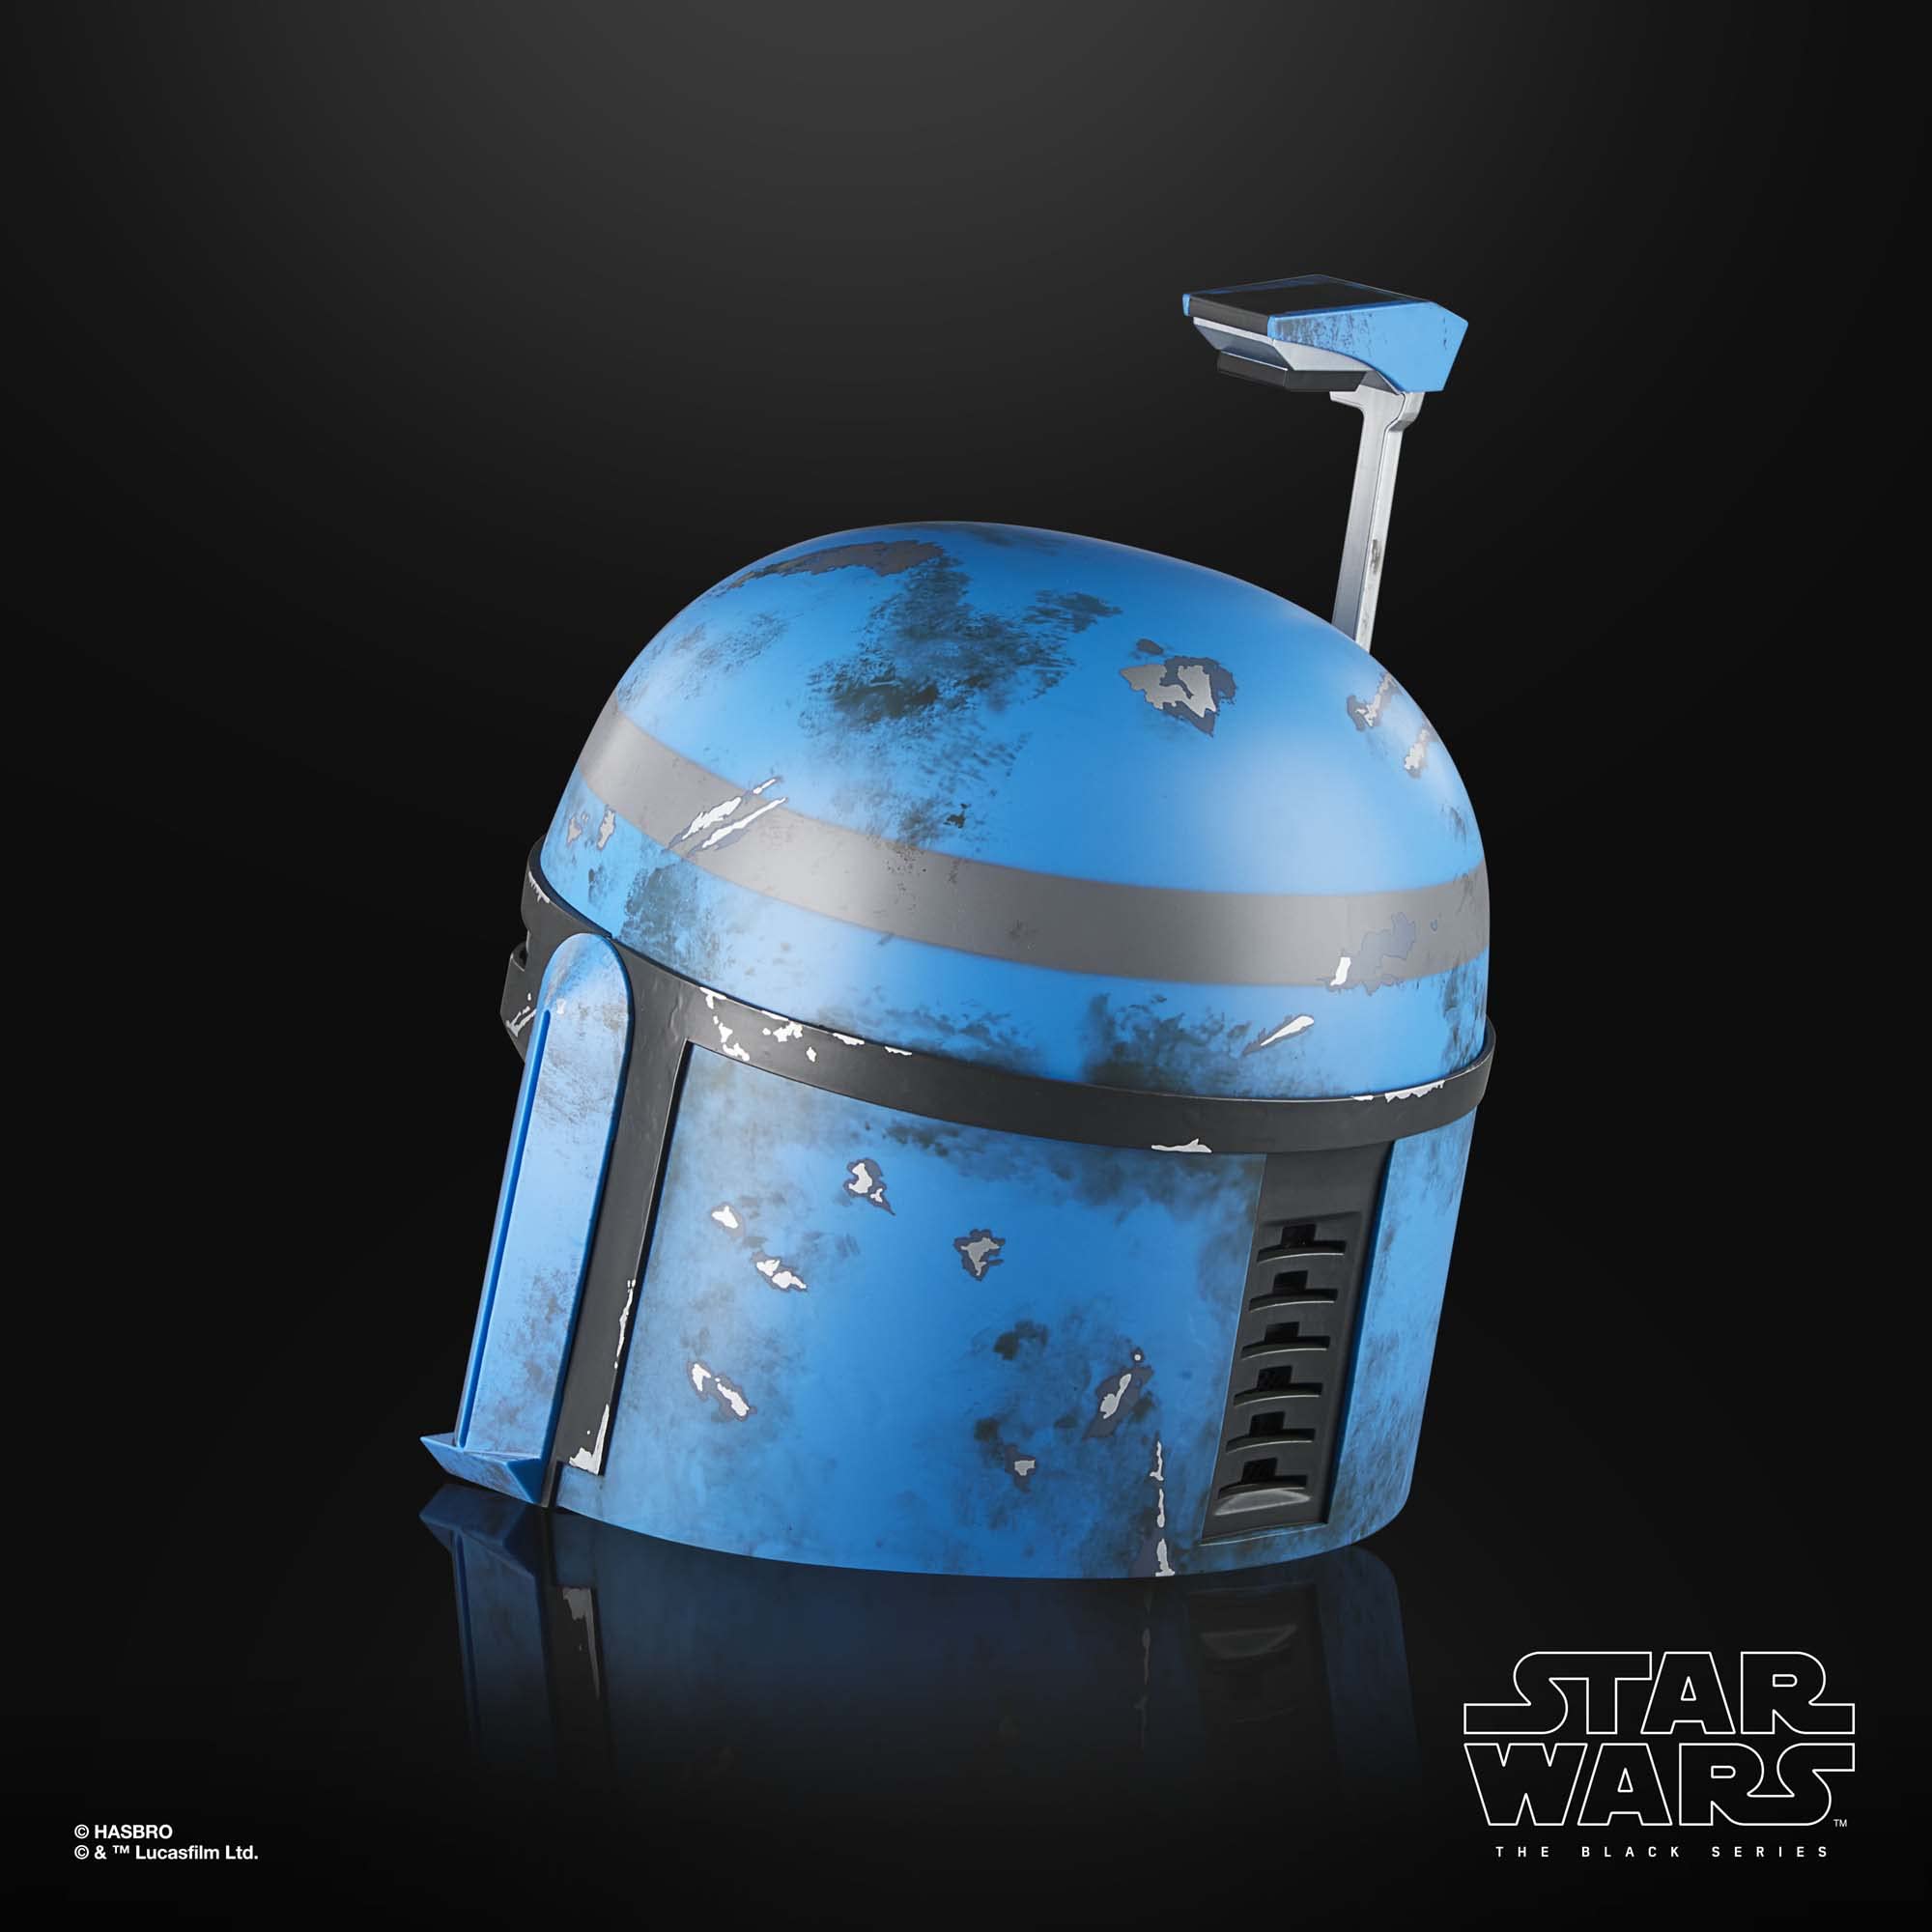 STAR WARS The Black Series Axe Woves Premium Electronic Helmet, The Mandalorian Adult Roleplay Item, Ages 14 and Up